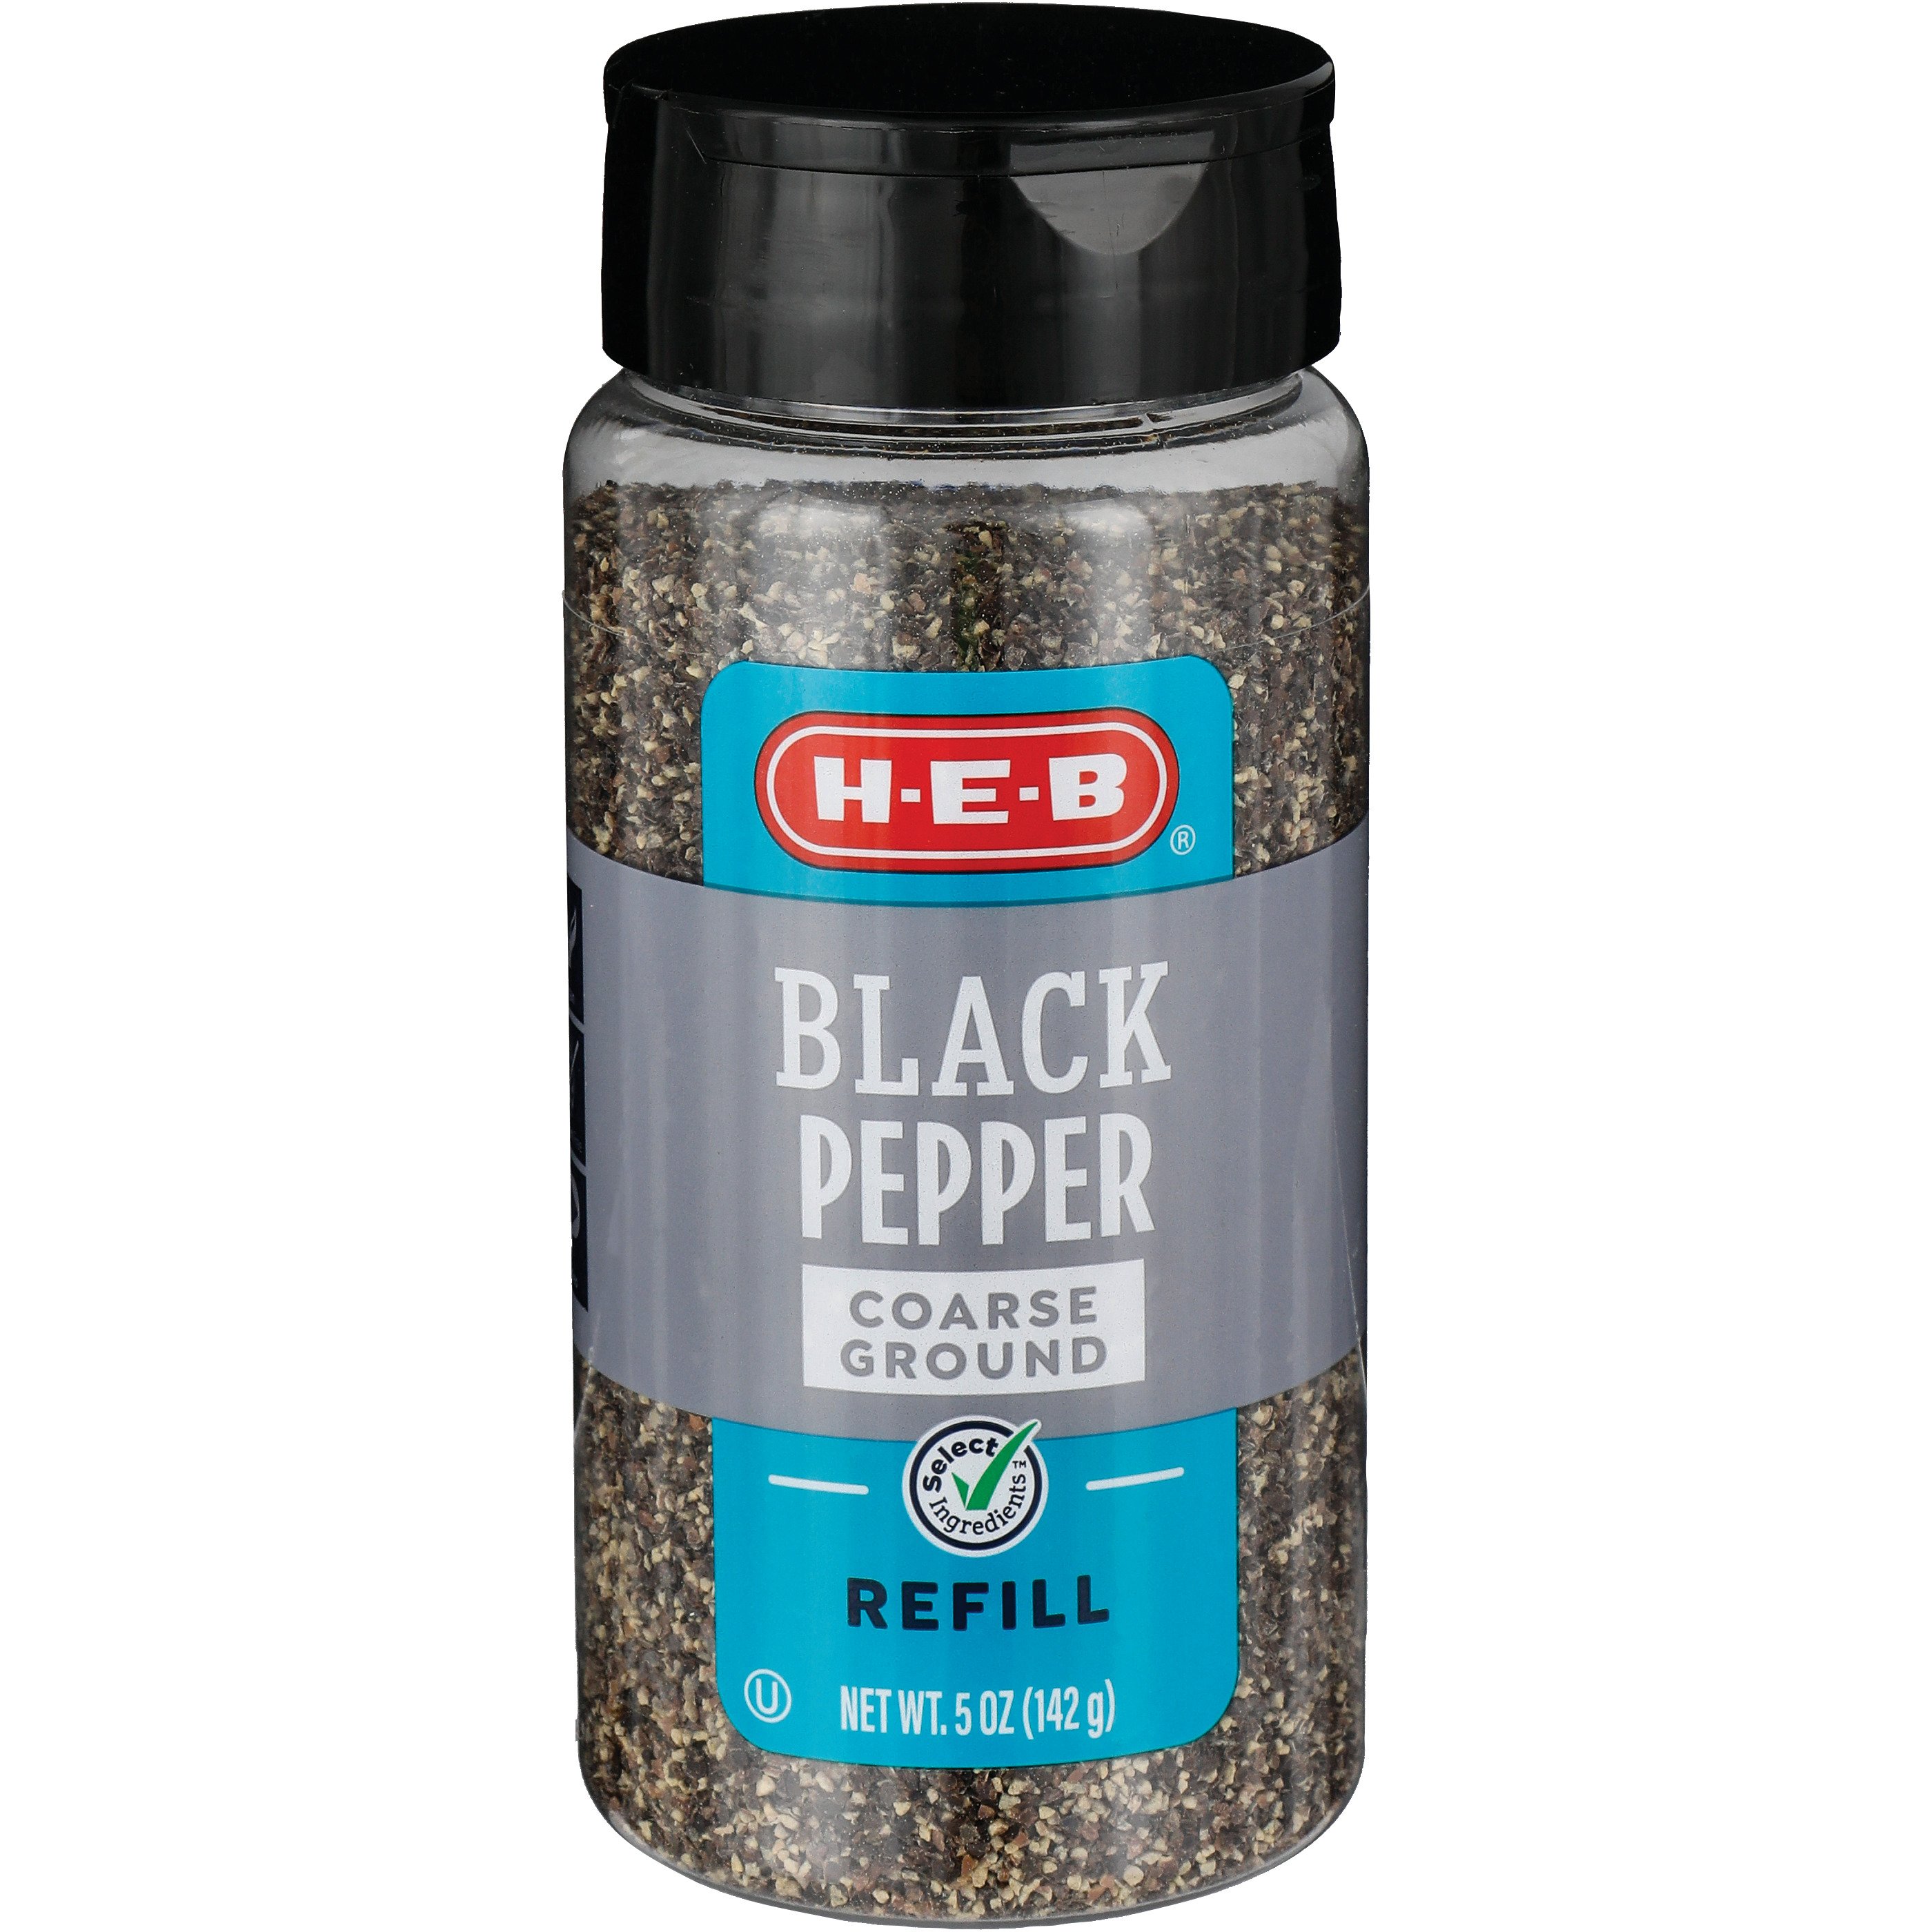 How to easily refill McCormick salt and pepper grinders 